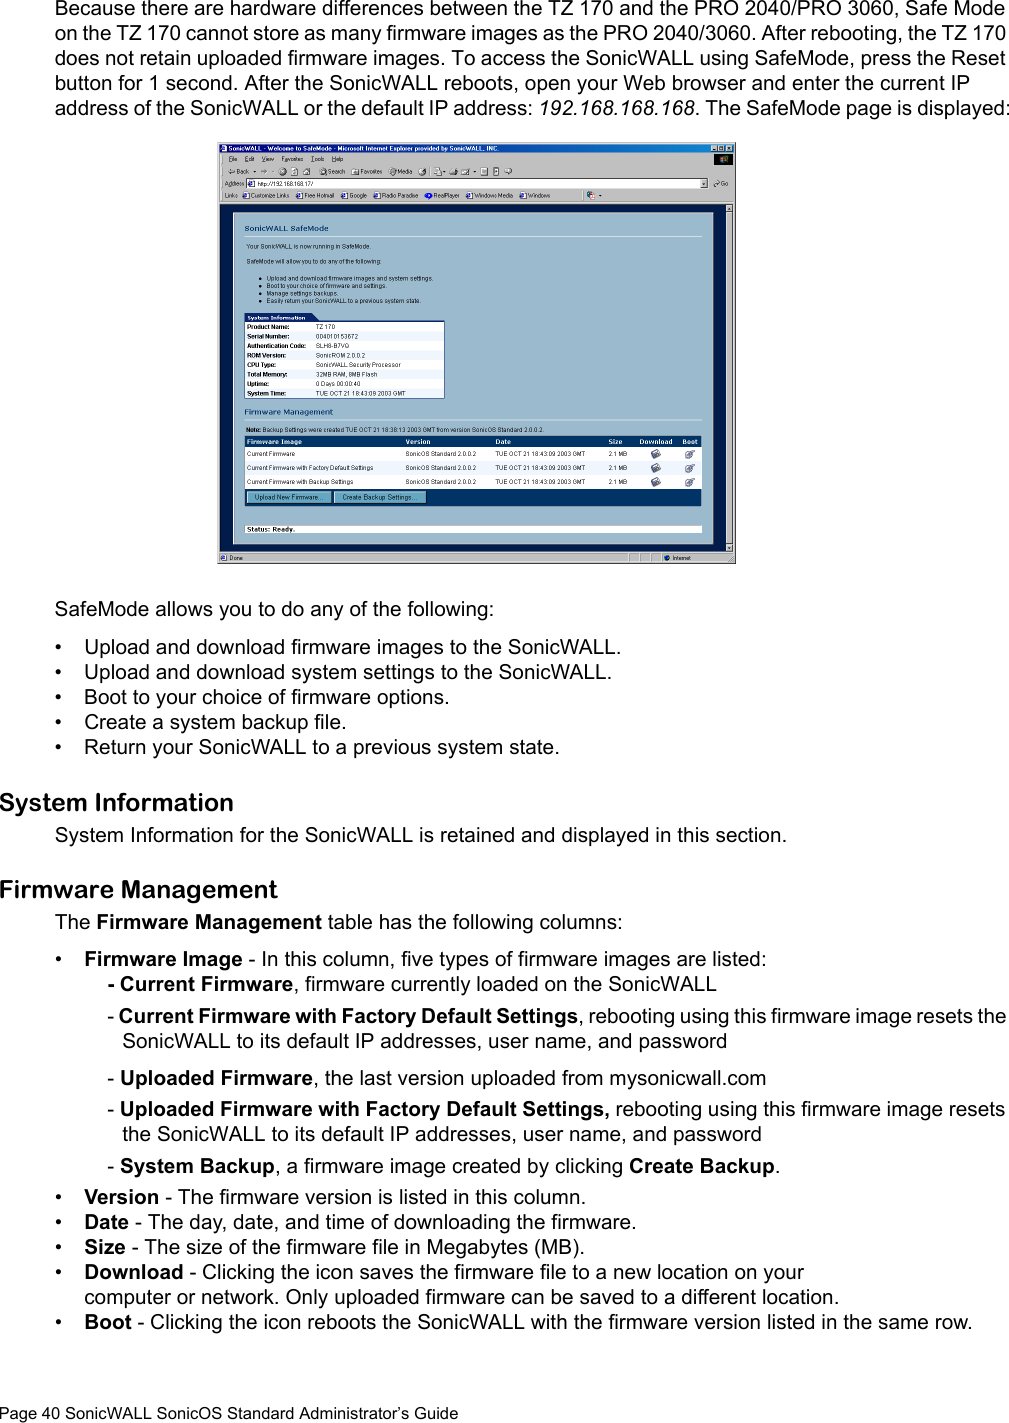 Page 40 SonicWALL SonicOS Standard Administrator’s GuideBecause there are hardware differences between the TZ 170 and the PRO 2040/PRO 3060, Safe Mode on the TZ 170 cannot store as many firmware images as the PRO 2040/3060. After rebooting, the TZ 170 does not retain uploaded firmware images. To access the SonicWALL using SafeMode, press the Reset button for 1 second. After the SonicWALL reboots, open your Web browser and enter the current IP address of the SonicWALL or the default IP address: 192.168.168.168. The SafeMode page is displayed:SafeMode allows you to do any of the following:• Upload and download firmware images to the SonicWALL.• Upload and download system settings to the SonicWALL.• Boot to your choice of firmware options.• Create a system backup file.• Return your SonicWALL to a previous system state. System Information System Information for the SonicWALL is retained and displayed in this section. Firmware ManagementThe Firmware Management table has the following columns:•Firmware Image - In this column, five types of firmware images are listed: - Current Firmware, firmware currently loaded on the SonicWALL- Current Firmware with Factory Default Settings, rebooting using this firmware image resets the SonicWALL to its default IP addresses, user name, and password- Uploaded Firmware, the last version uploaded from mysonicwall.com - Uploaded Firmware with Factory Default Settings, rebooting using this firmware image resets the SonicWALL to its default IP addresses, user name, and password- System Backup, a firmware image created by clicking Create Backup. •Version - The firmware version is listed in this column. •Date - The day, date, and time of downloading the firmware. •Size - The size of the firmware file in Megabytes (MB). •Download - Clicking the icon saves the firmware file to a new location on your computer or network. Only uploaded firmware can be saved to a different location. •Boot - Clicking the icon reboots the SonicWALL with the firmware version listed in the same row.